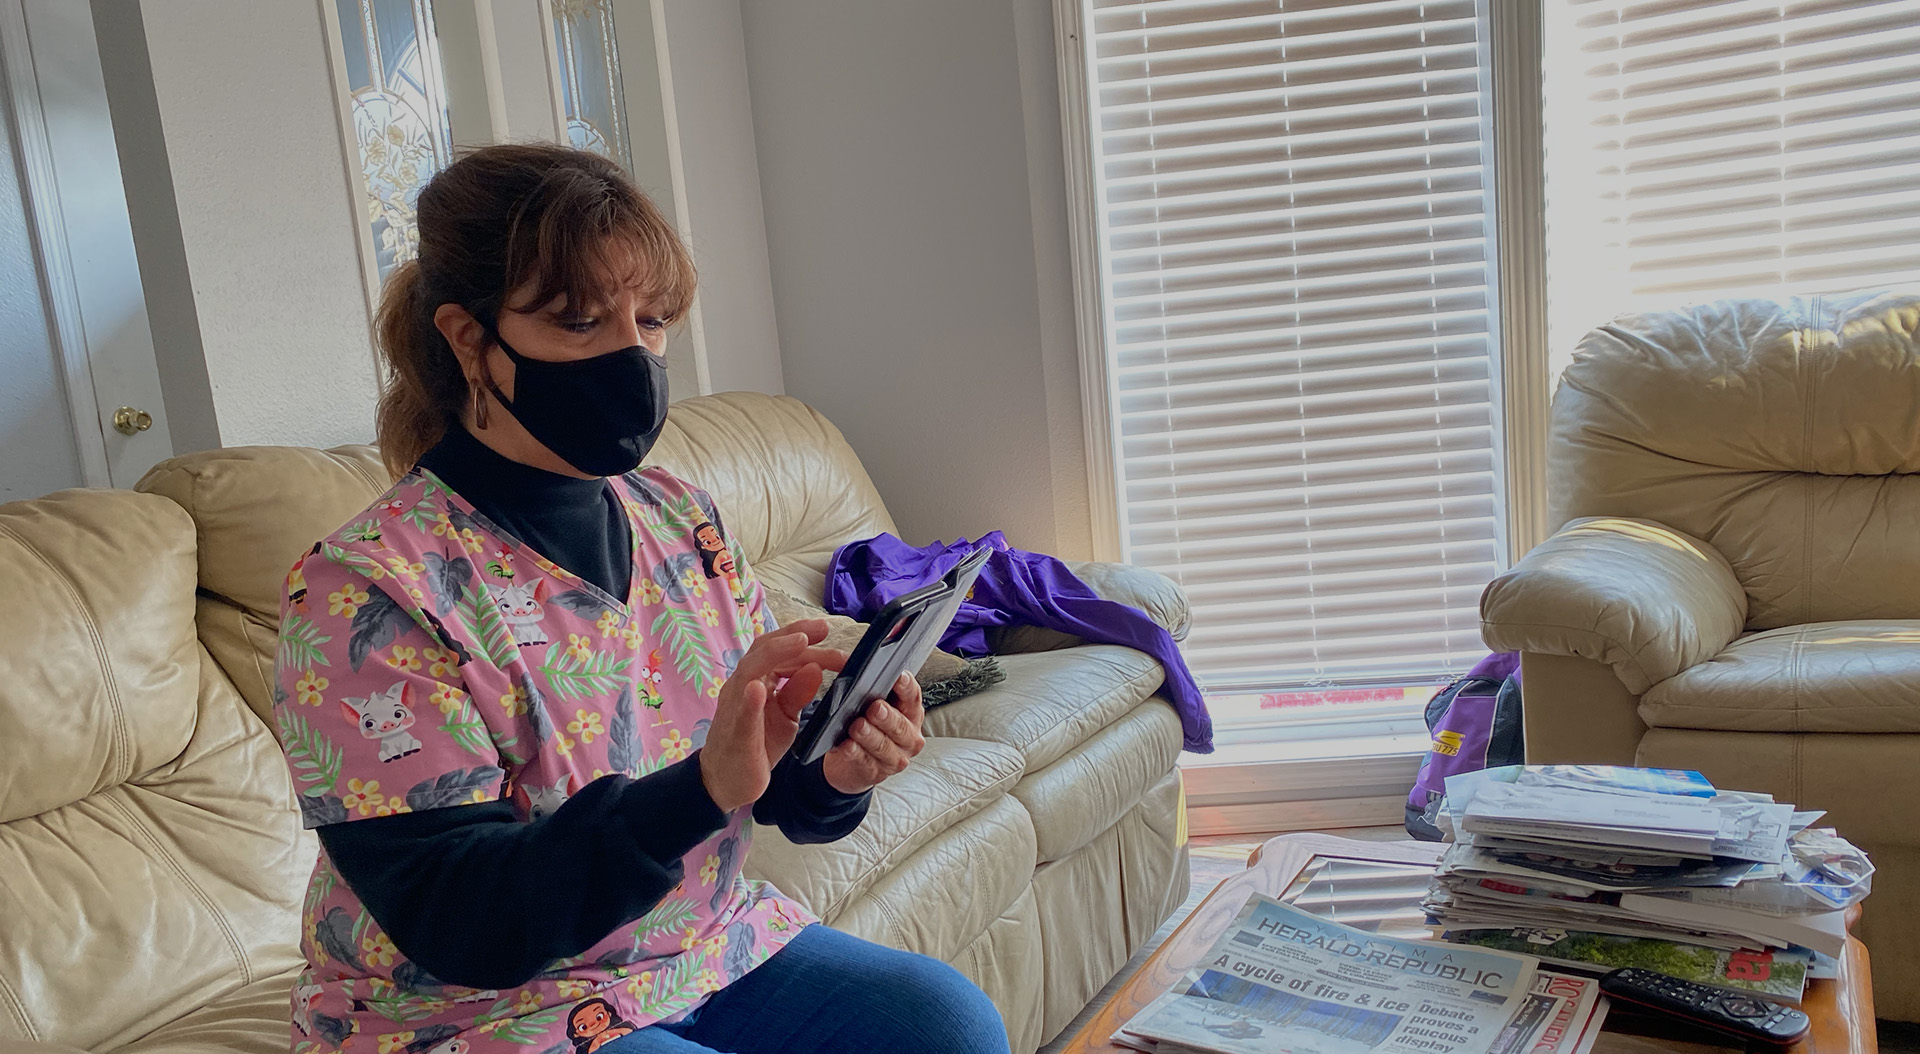 A caregiver wearing a mask looks at their phone